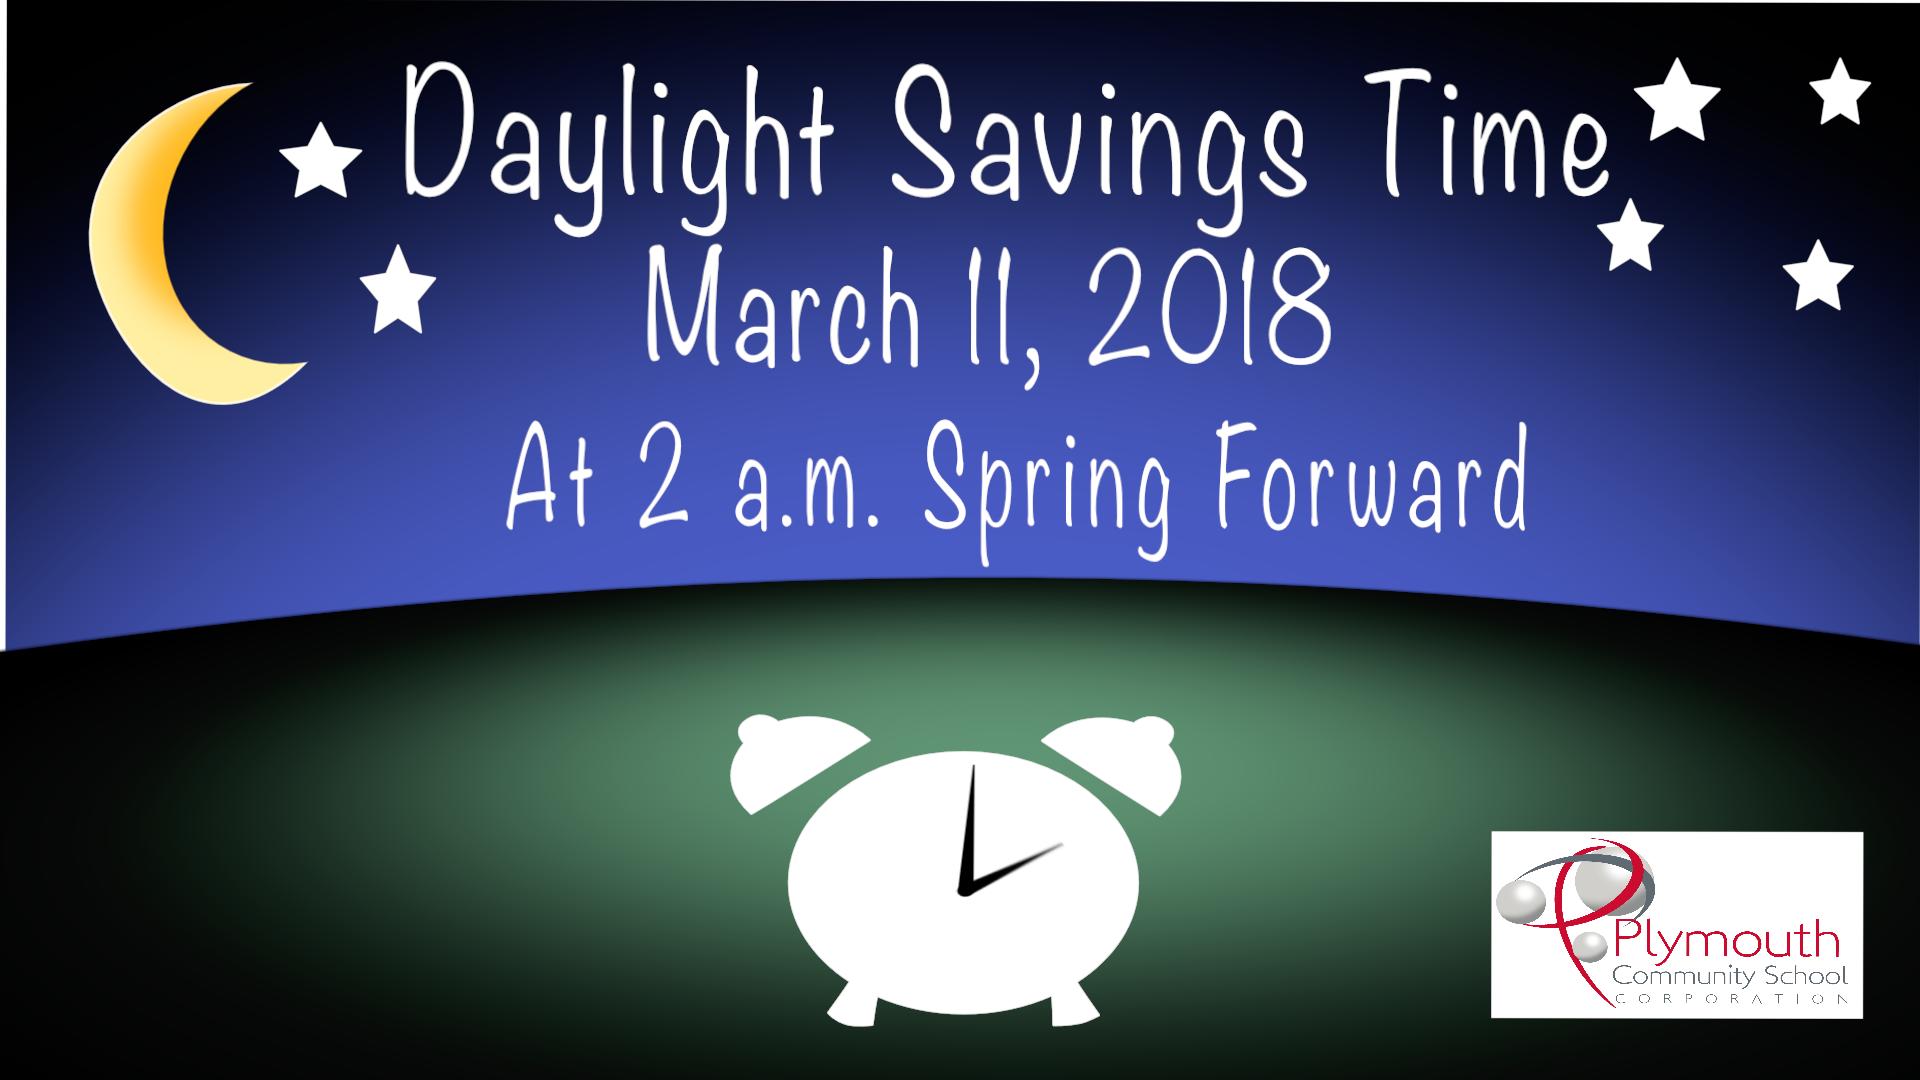 Daylight Savings Time March 11, 2018 at 2 a.m. spring forward with nightime image, clock, and PCSC logo